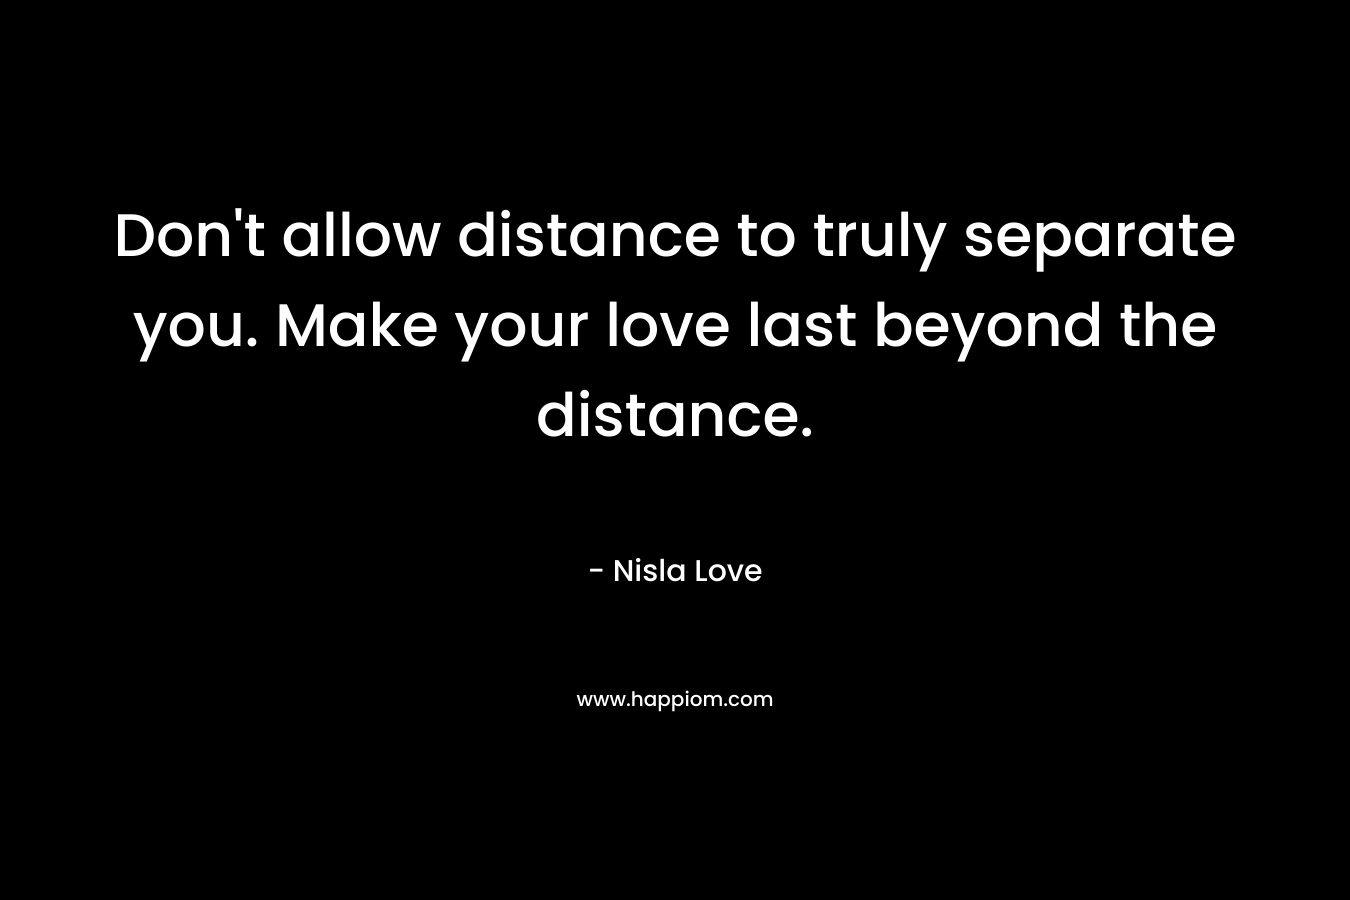 Don't allow distance to truly separate you. Make your love last beyond the distance.